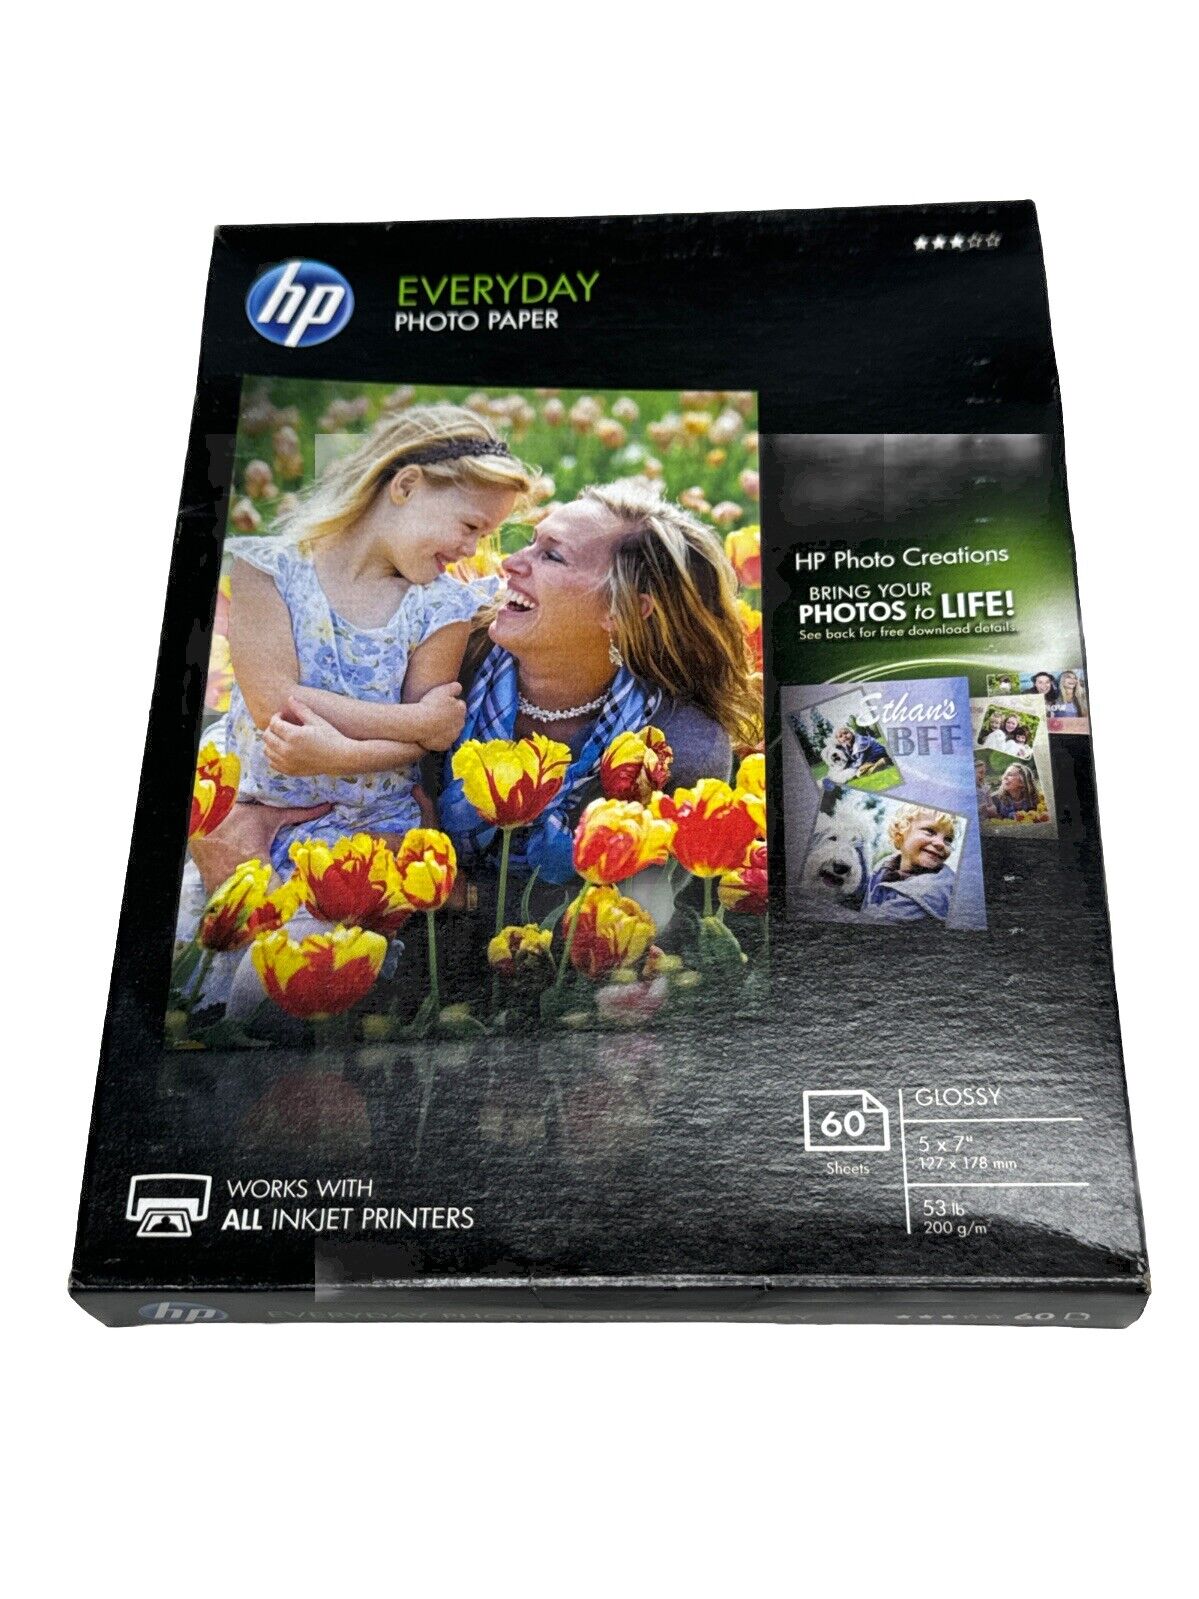 HP Genuine Everyday Photo Paper 60 Sheets Glossy 5x7 CH097A Sealed New Unopened